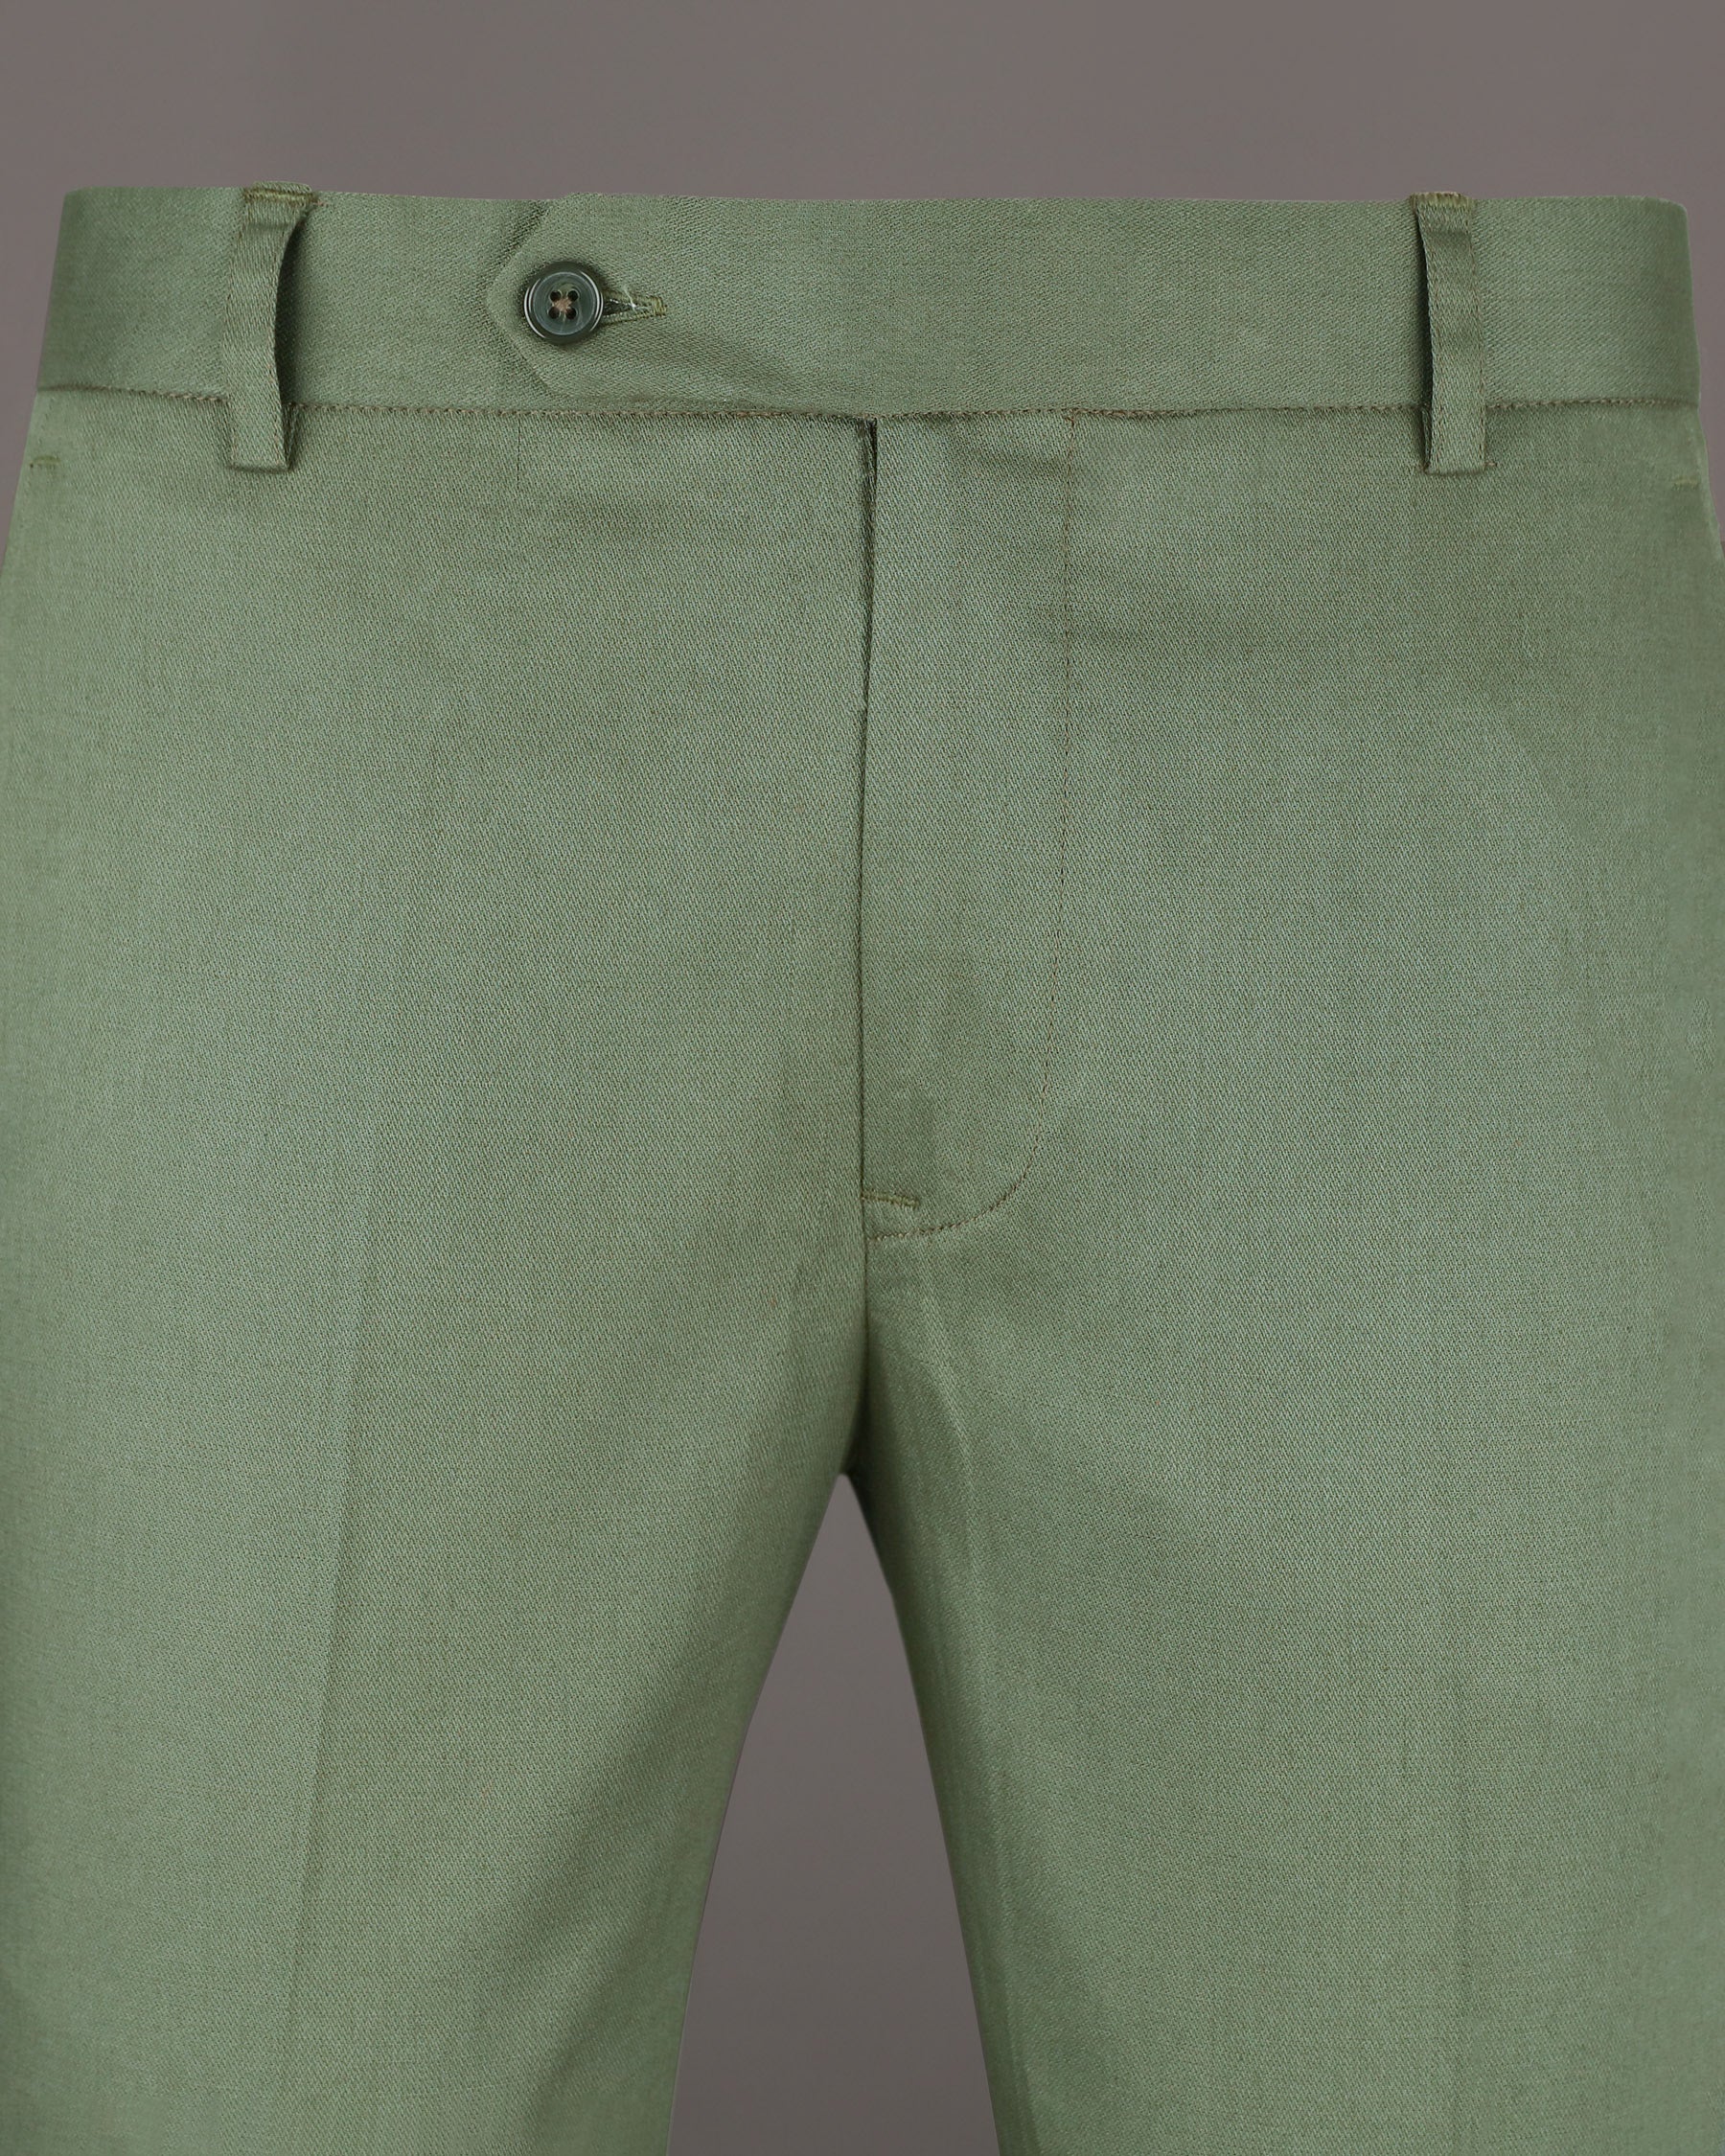 Willow Grove Green Luxurious Linen Pant T1197-28, T1197-30, T1197-32, T1197-34, T1197-36, T1197-38, T1197-42, T1197-44, T1197-40